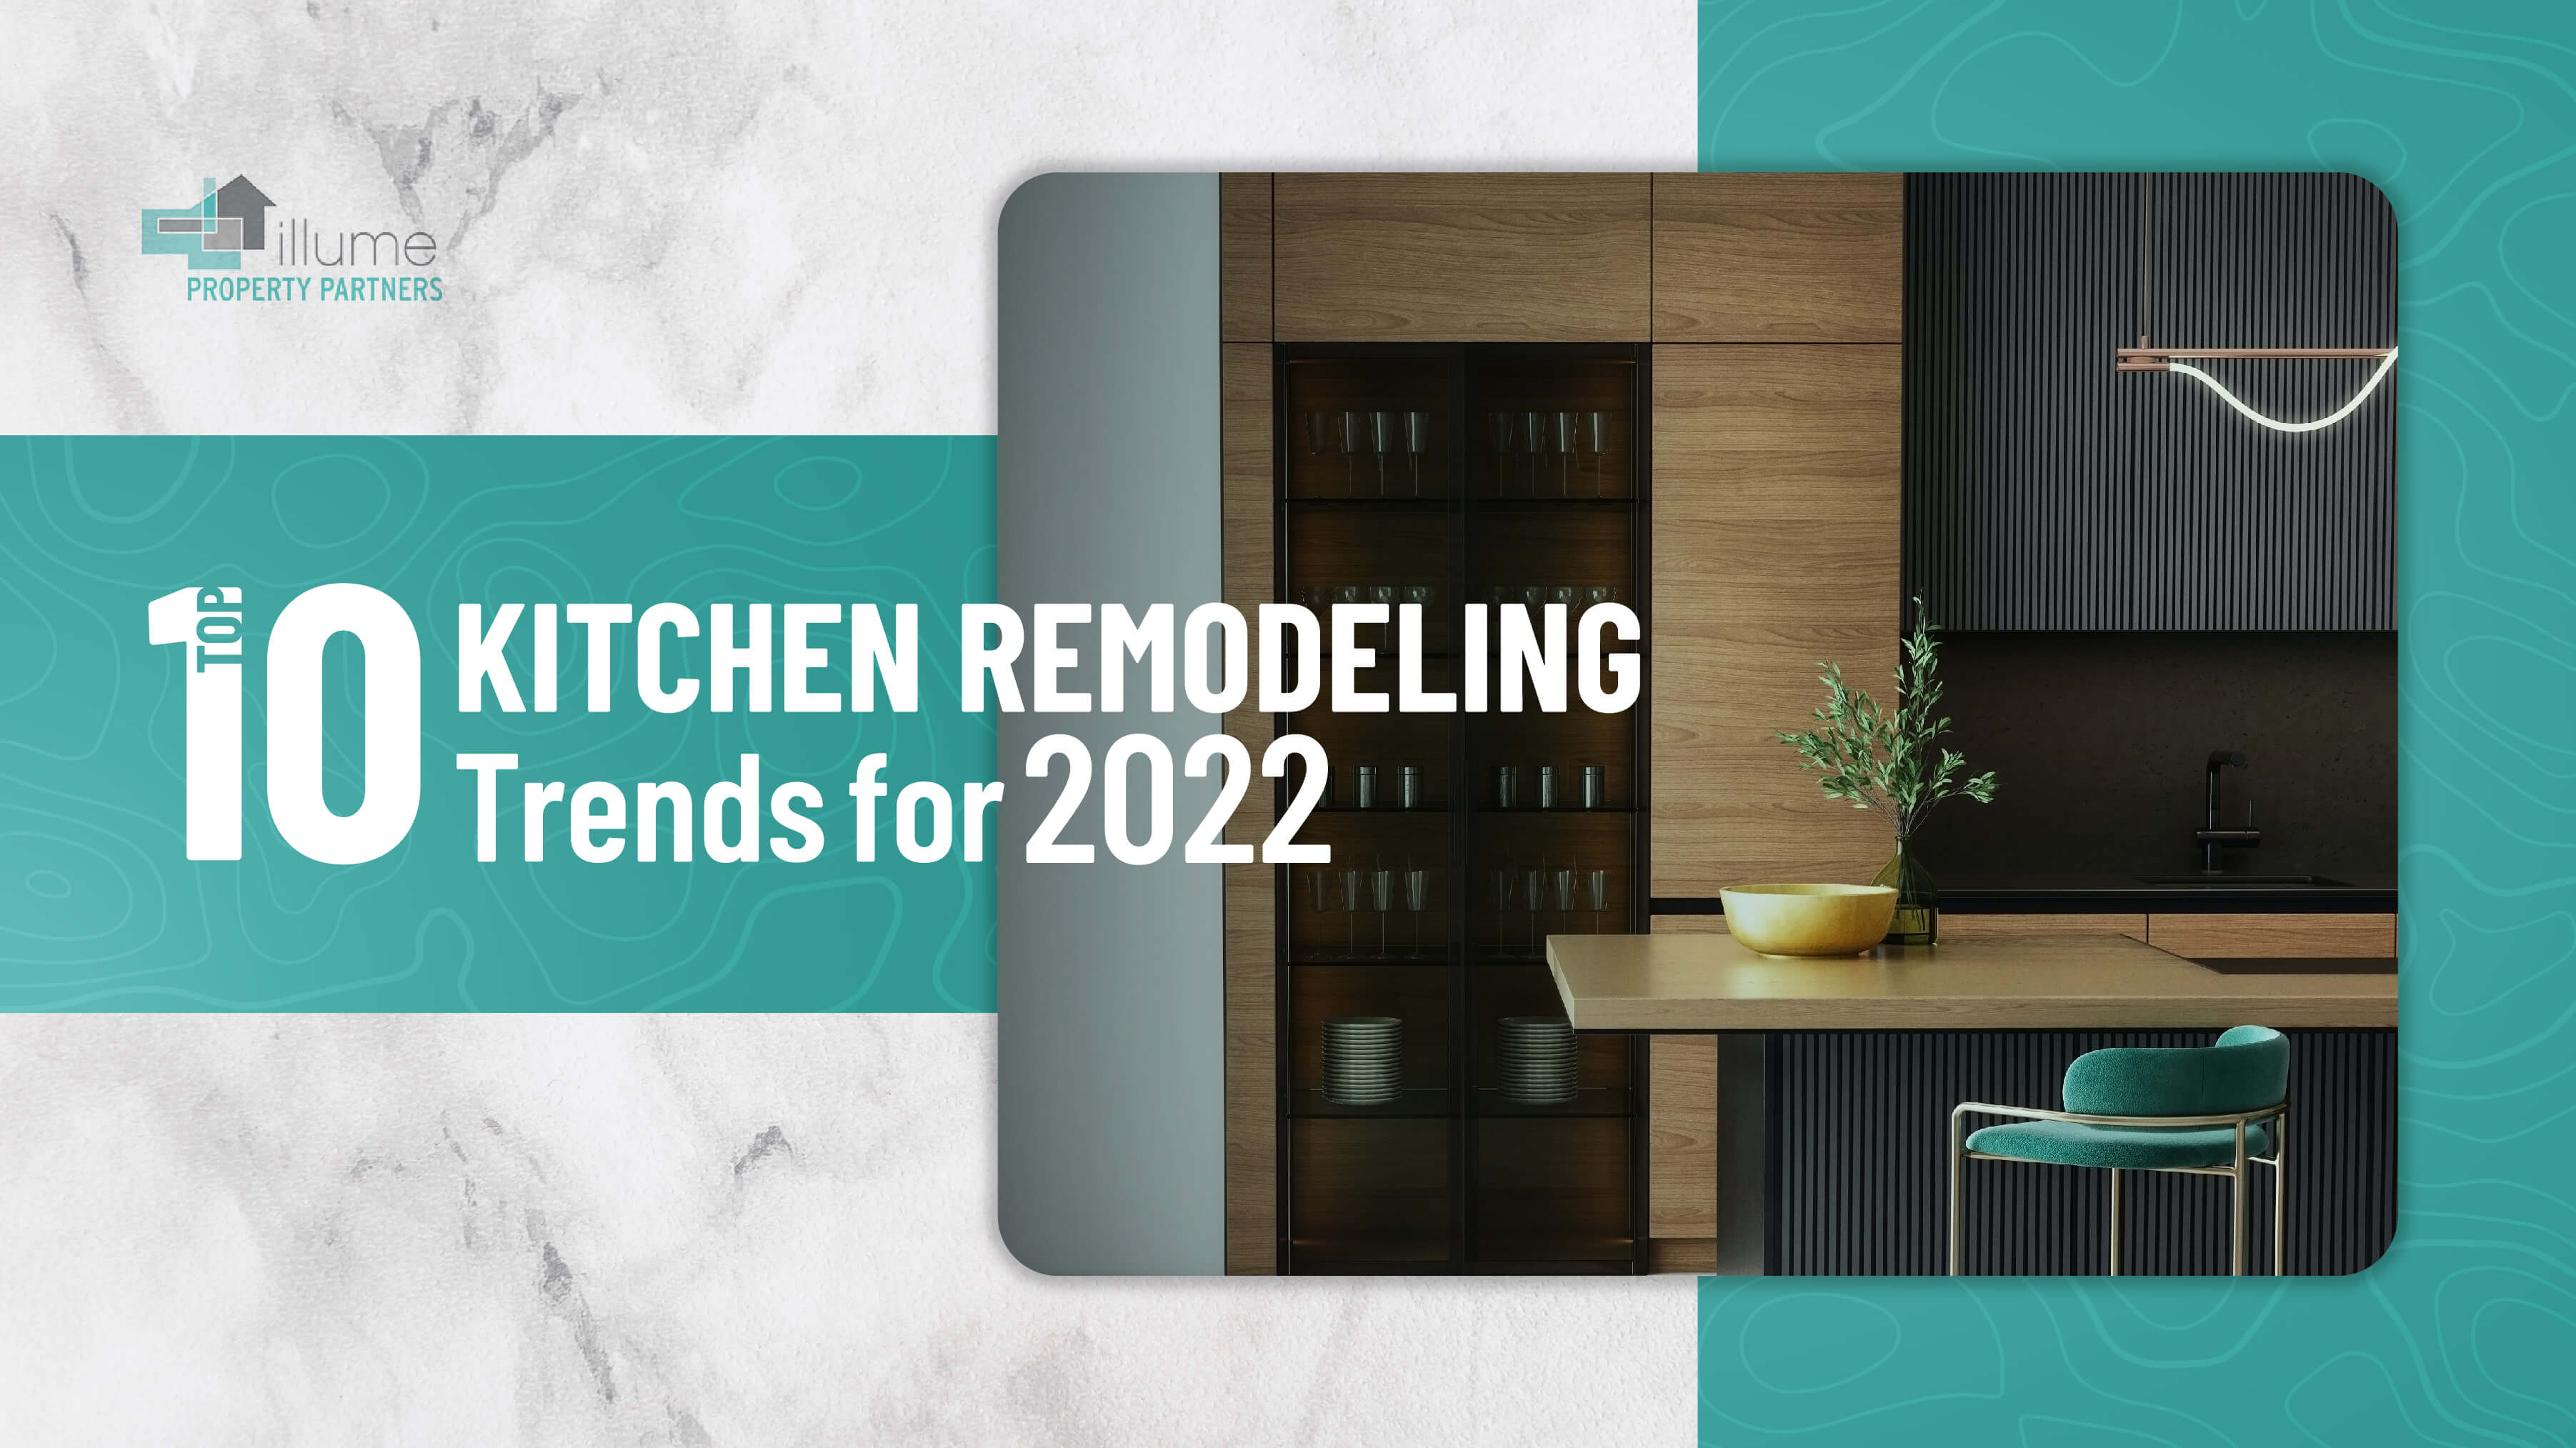 Top 10 Kitchen Remodeling Trends for 2022